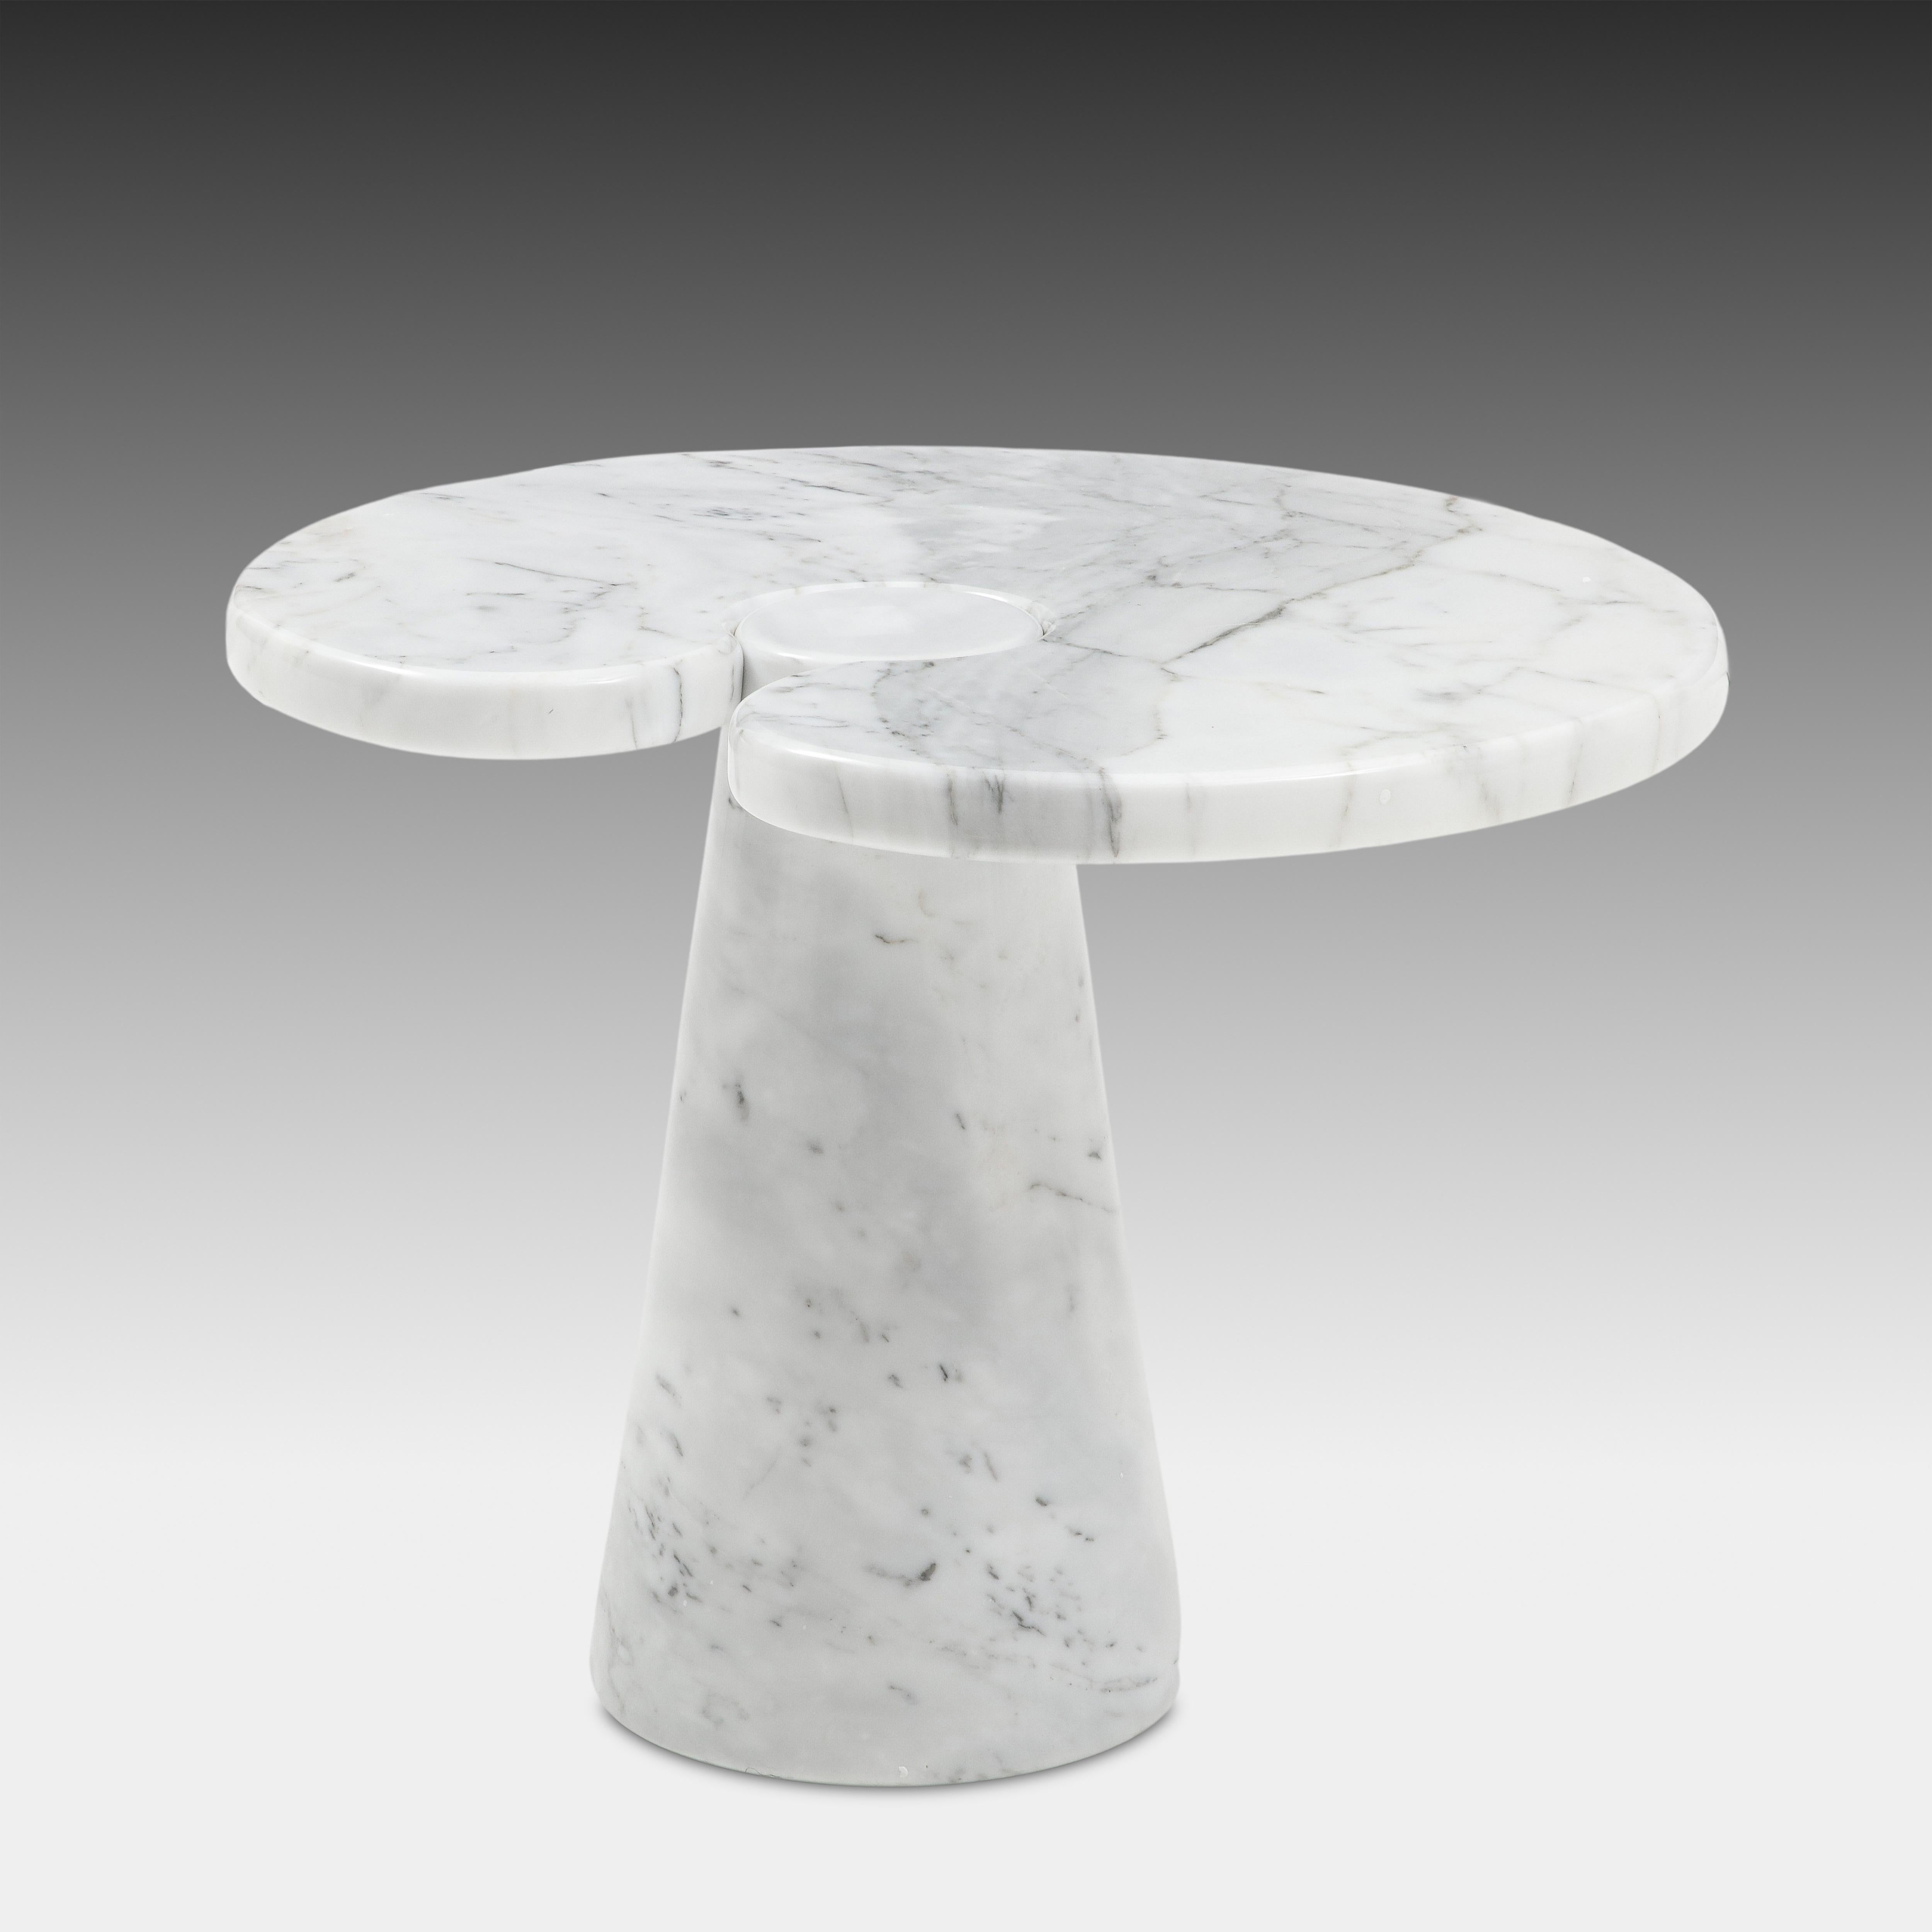 Designed by Angelo Mangiarotti for Skipper from the Eros series, Carrara marble side table with top fitted on conical base. This elegantly organic table has beautiful subtle veining throughout. Original Skipper label on underside. As the label